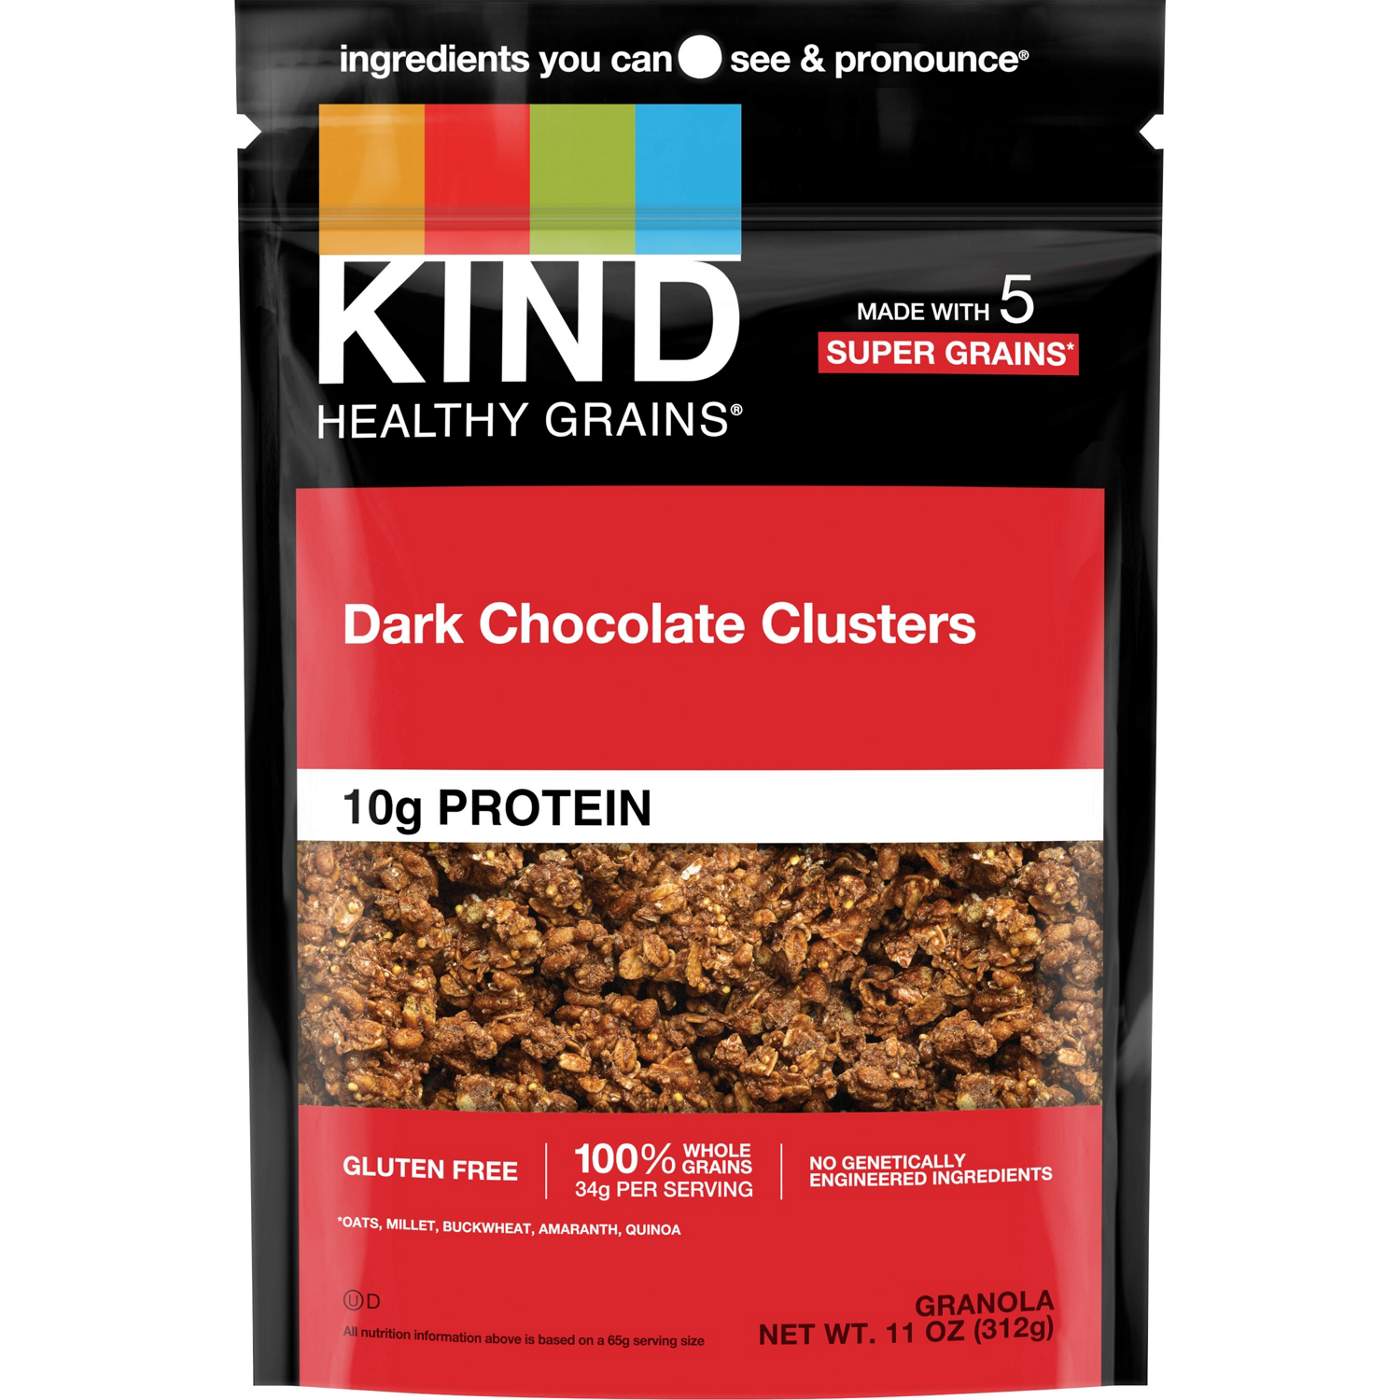 Kind Healthy Grains 10g Protein Granola - Dark Chocolate Clusters; image 1 of 3